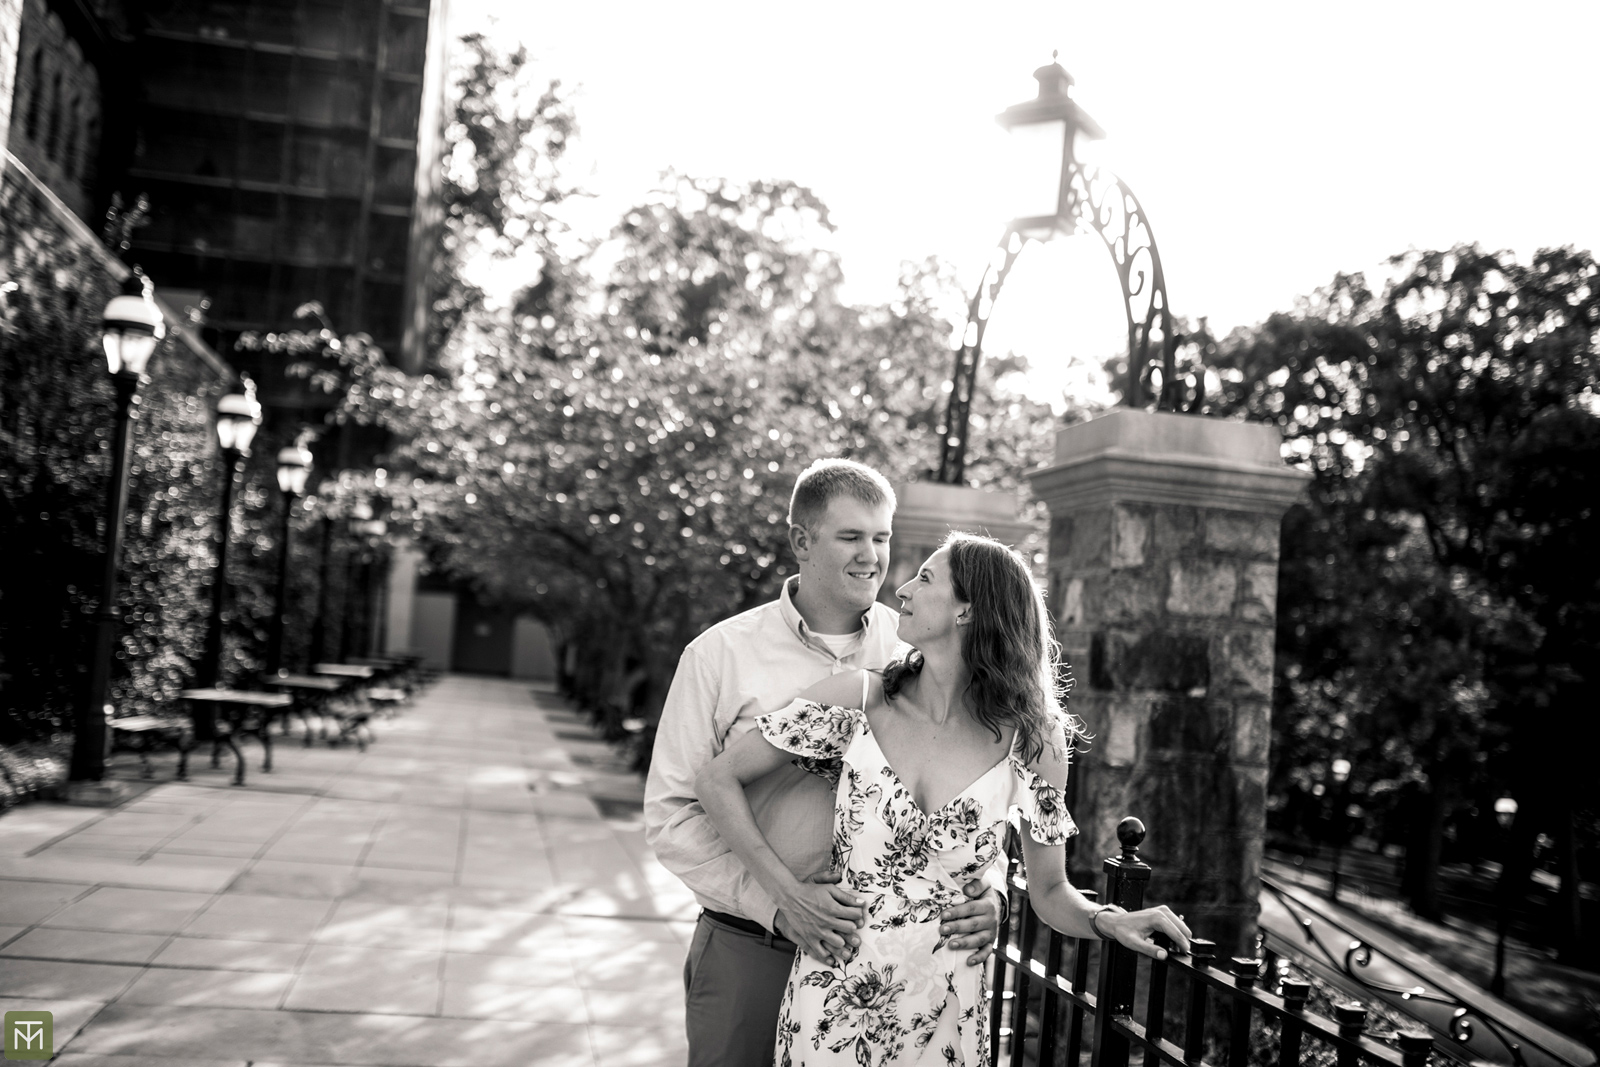 Justin & Katie {Esession by Haley}